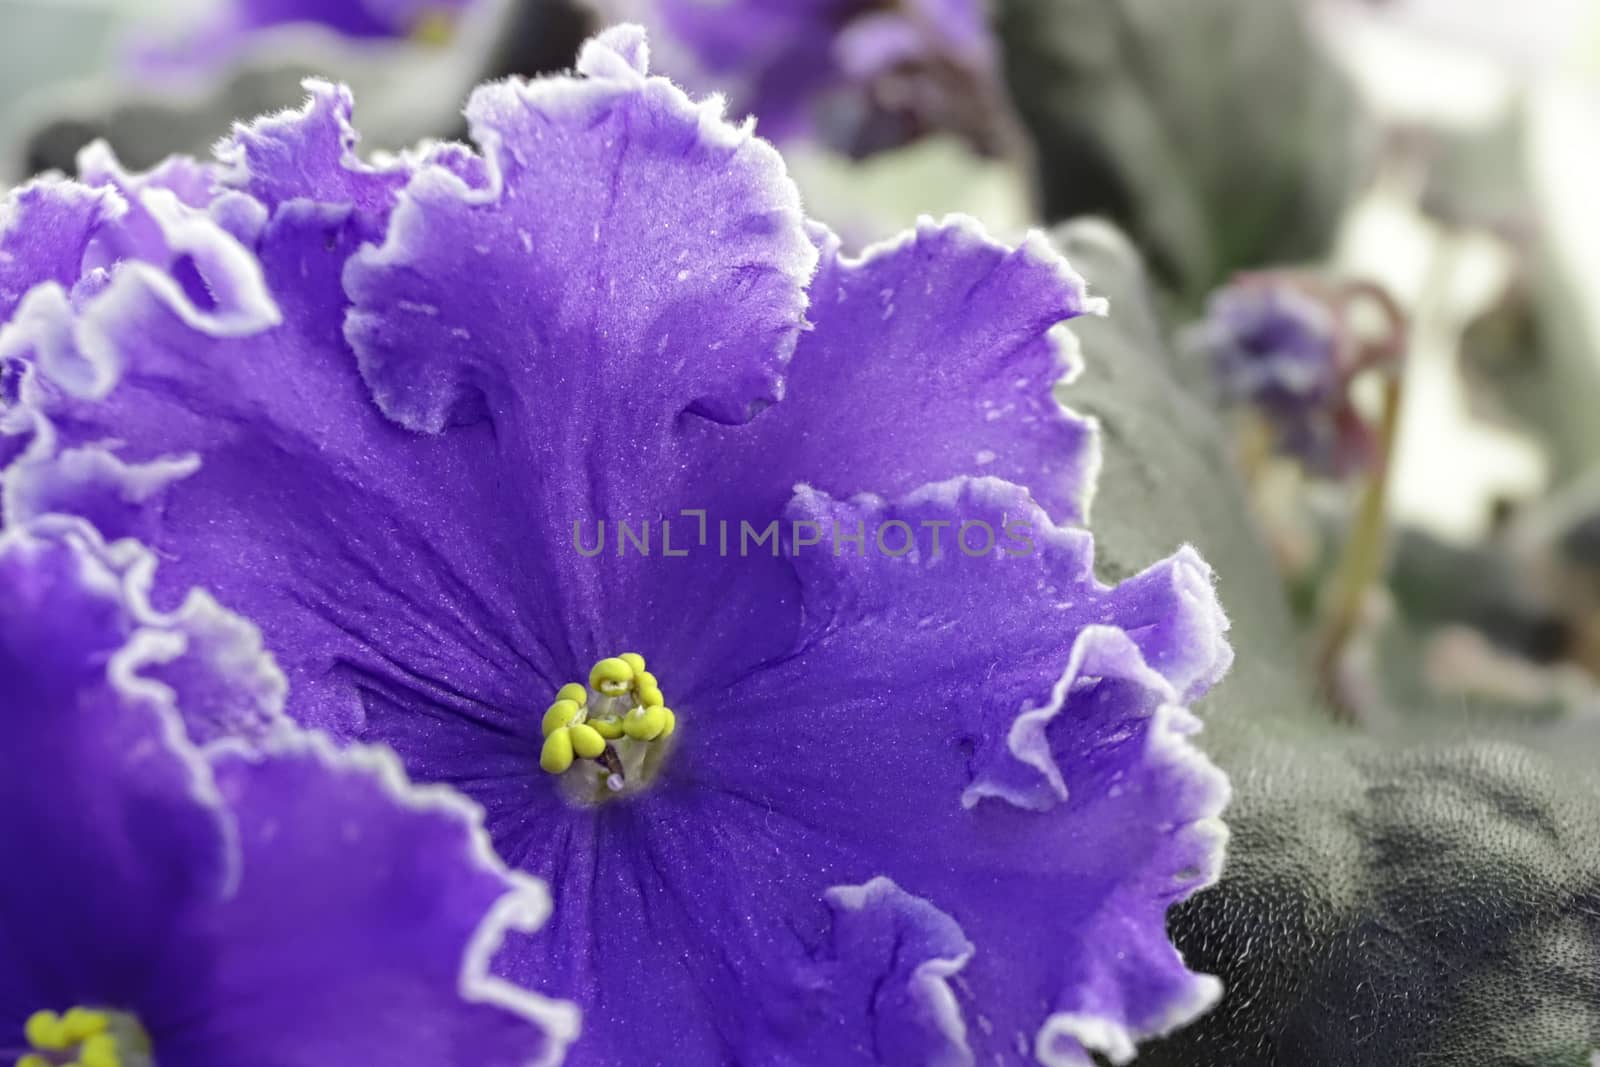 Beautiful Saintpaulia or Uzumbar violet. Violet indoor flowers close-up. Natural floral background for happy birthday, mother's day, women's day, anniversary, wedding invitation